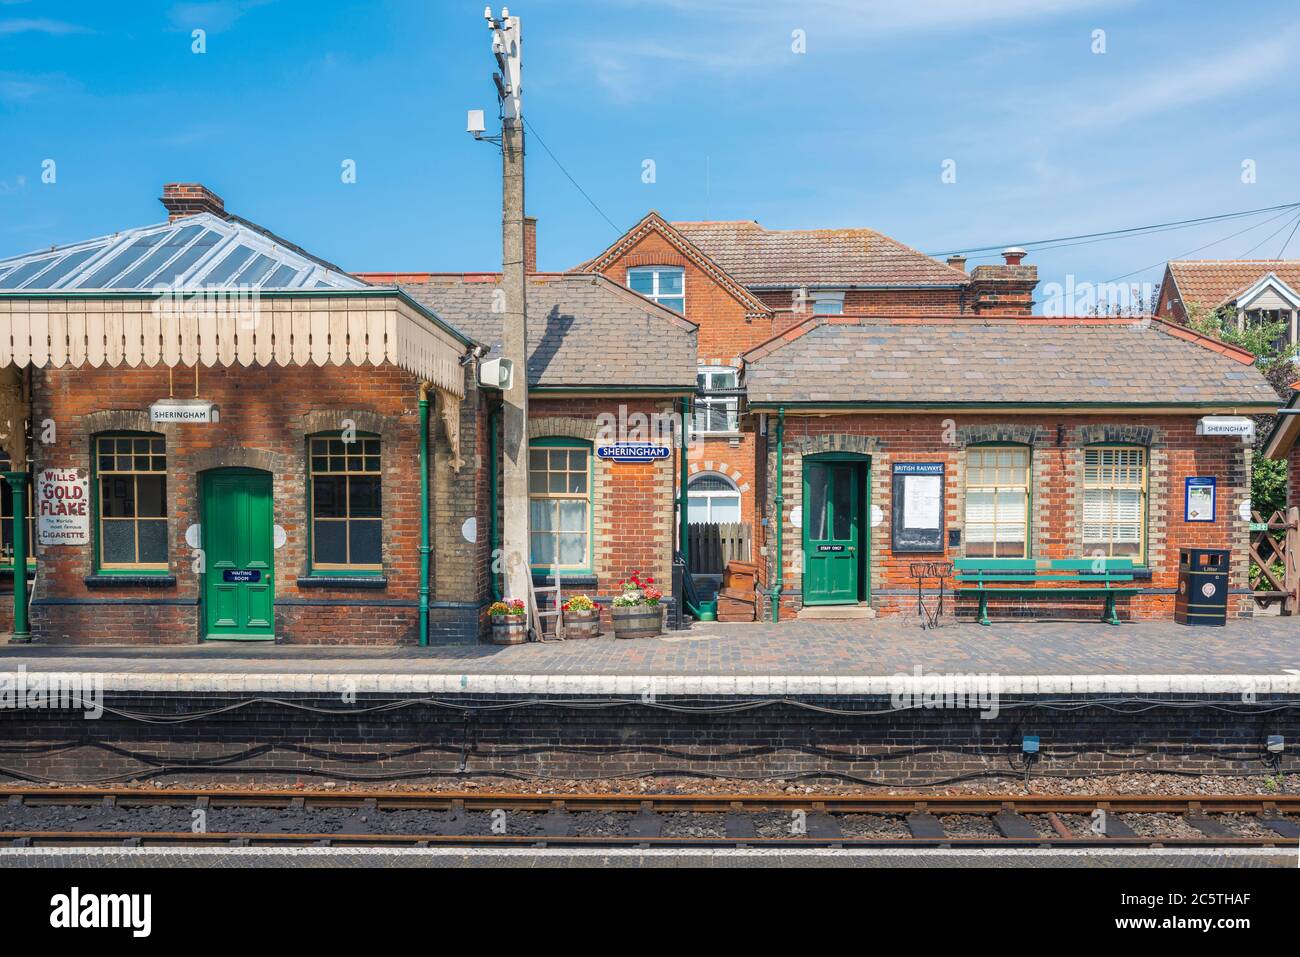 Sheringham railway, view of the platform and buildings of the North Norfolk Railway, a vintage train station in Sheringham, Norfolk, East Anglia,UK Stock Photo